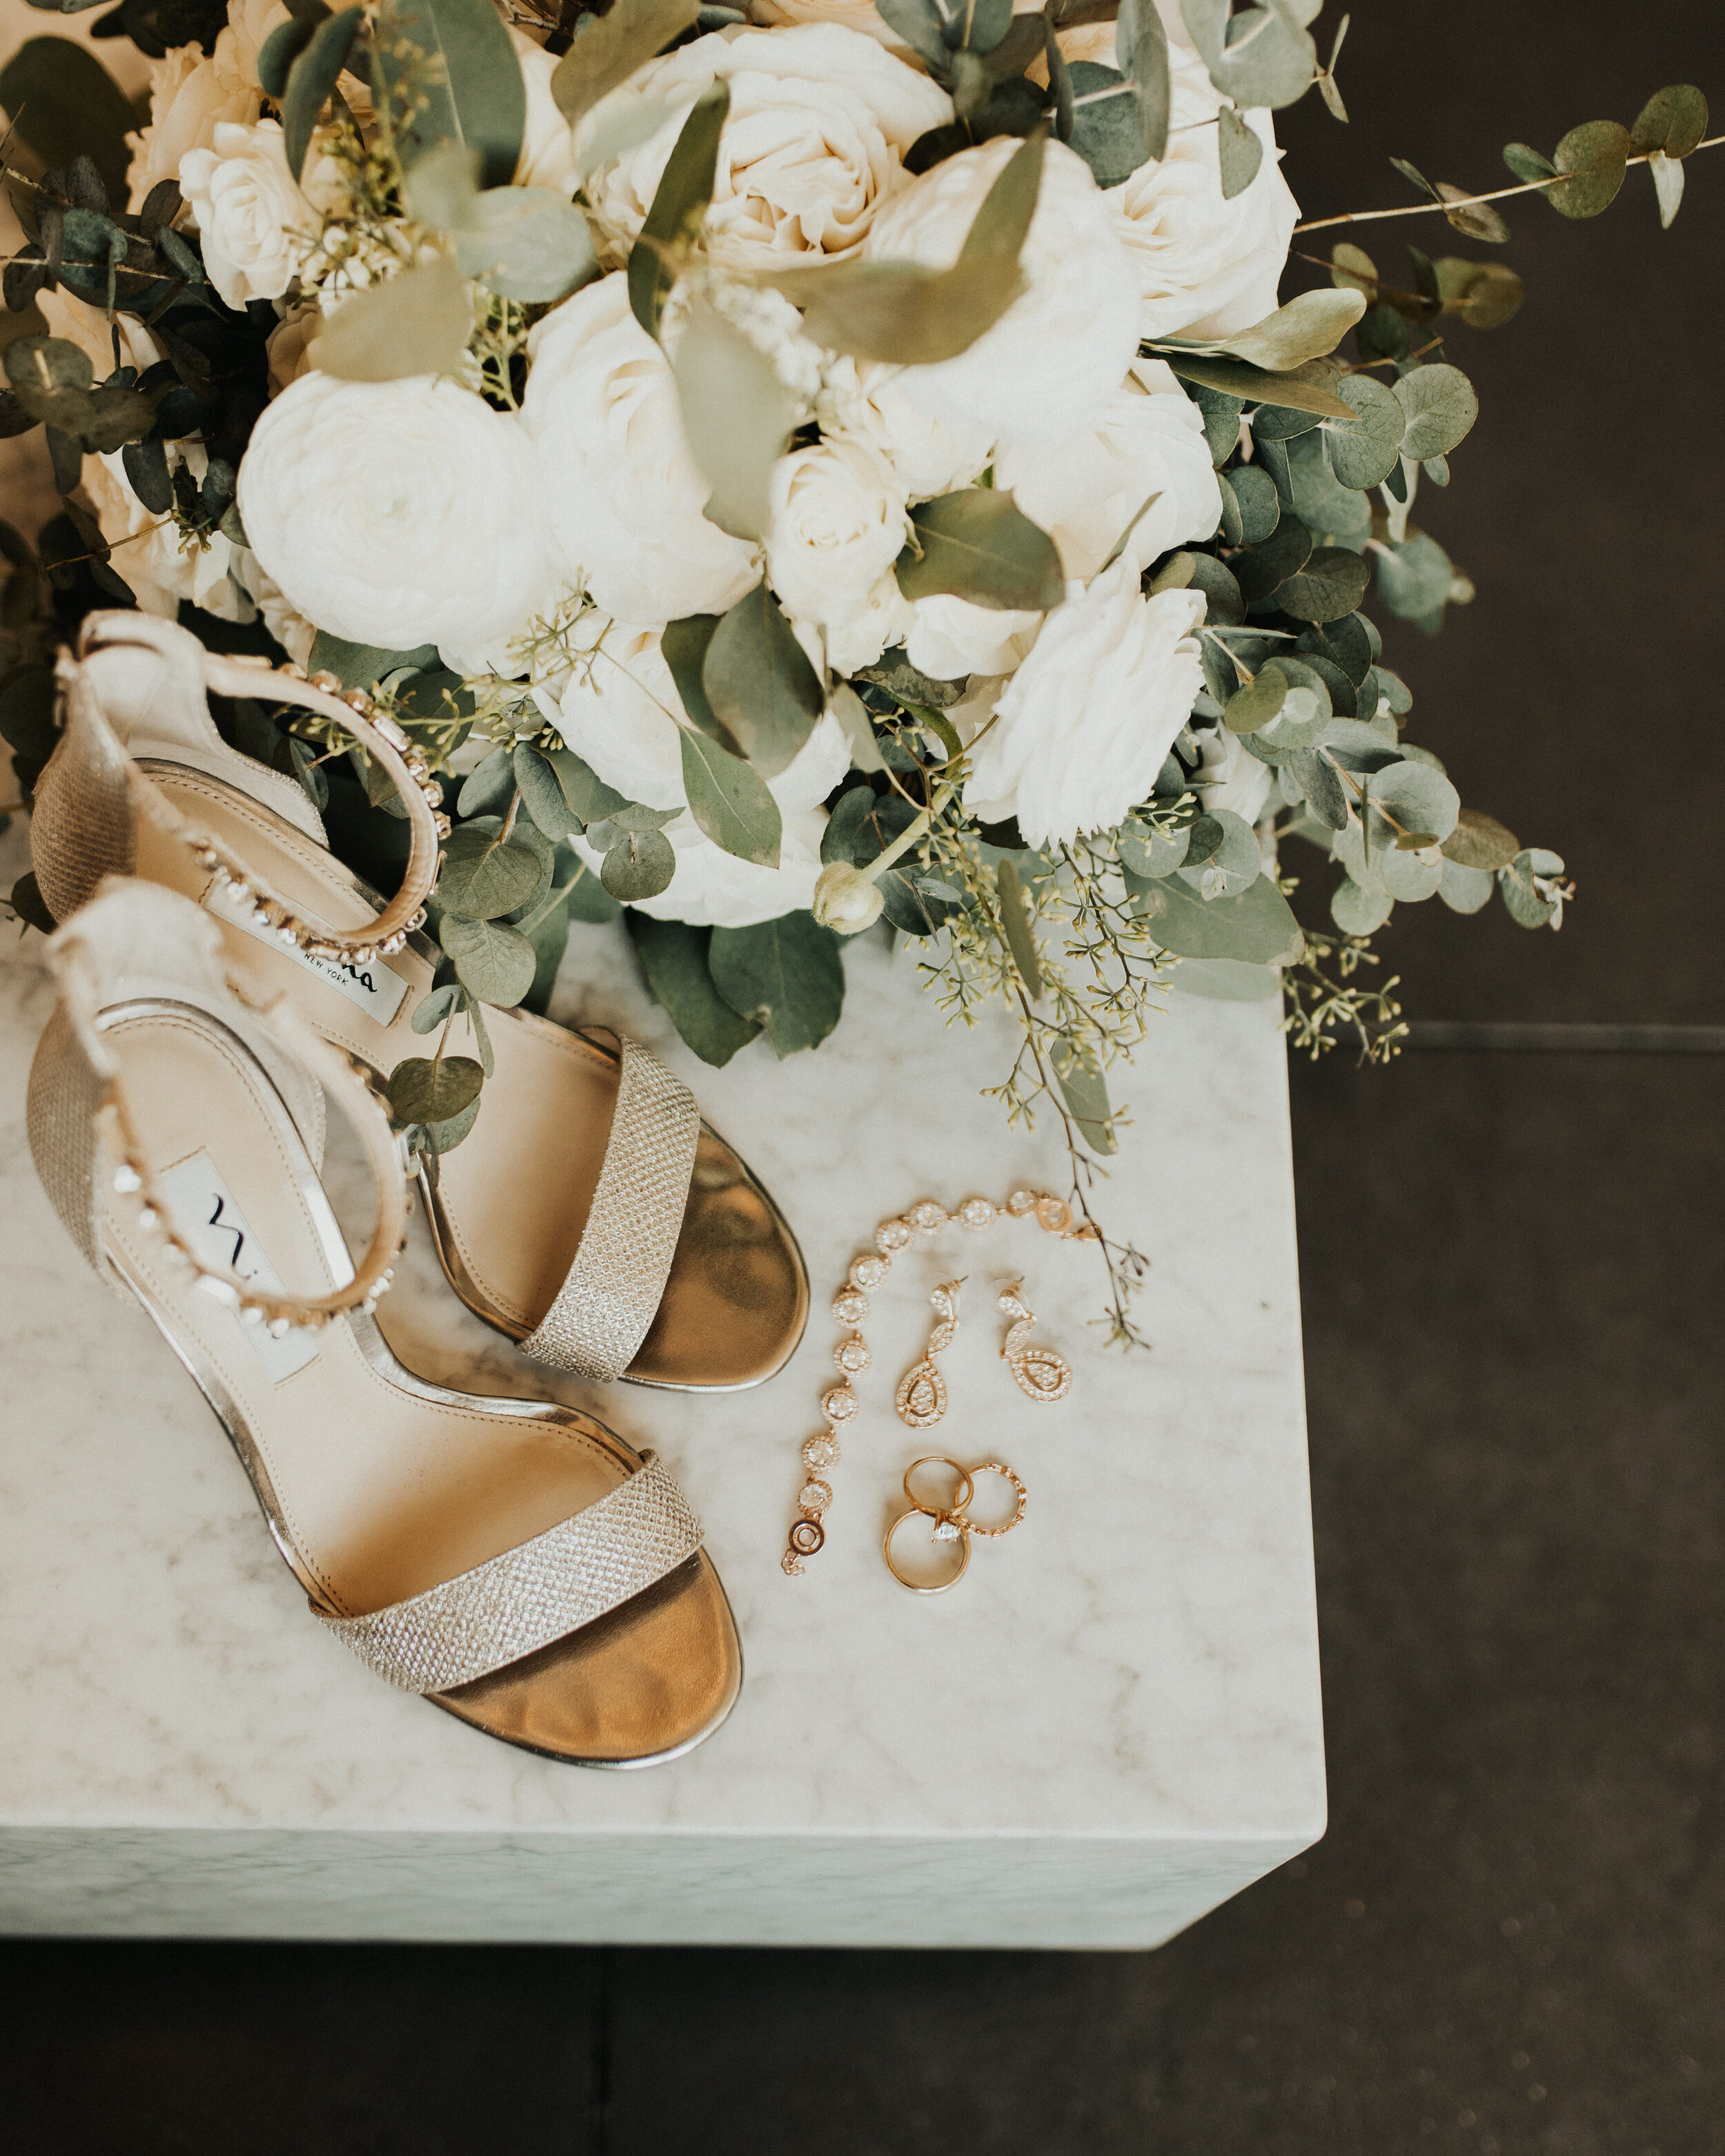 Bridal shoes: Modern, Yet Classic Fall Wedding at Company 251 featured on CHI thee WED